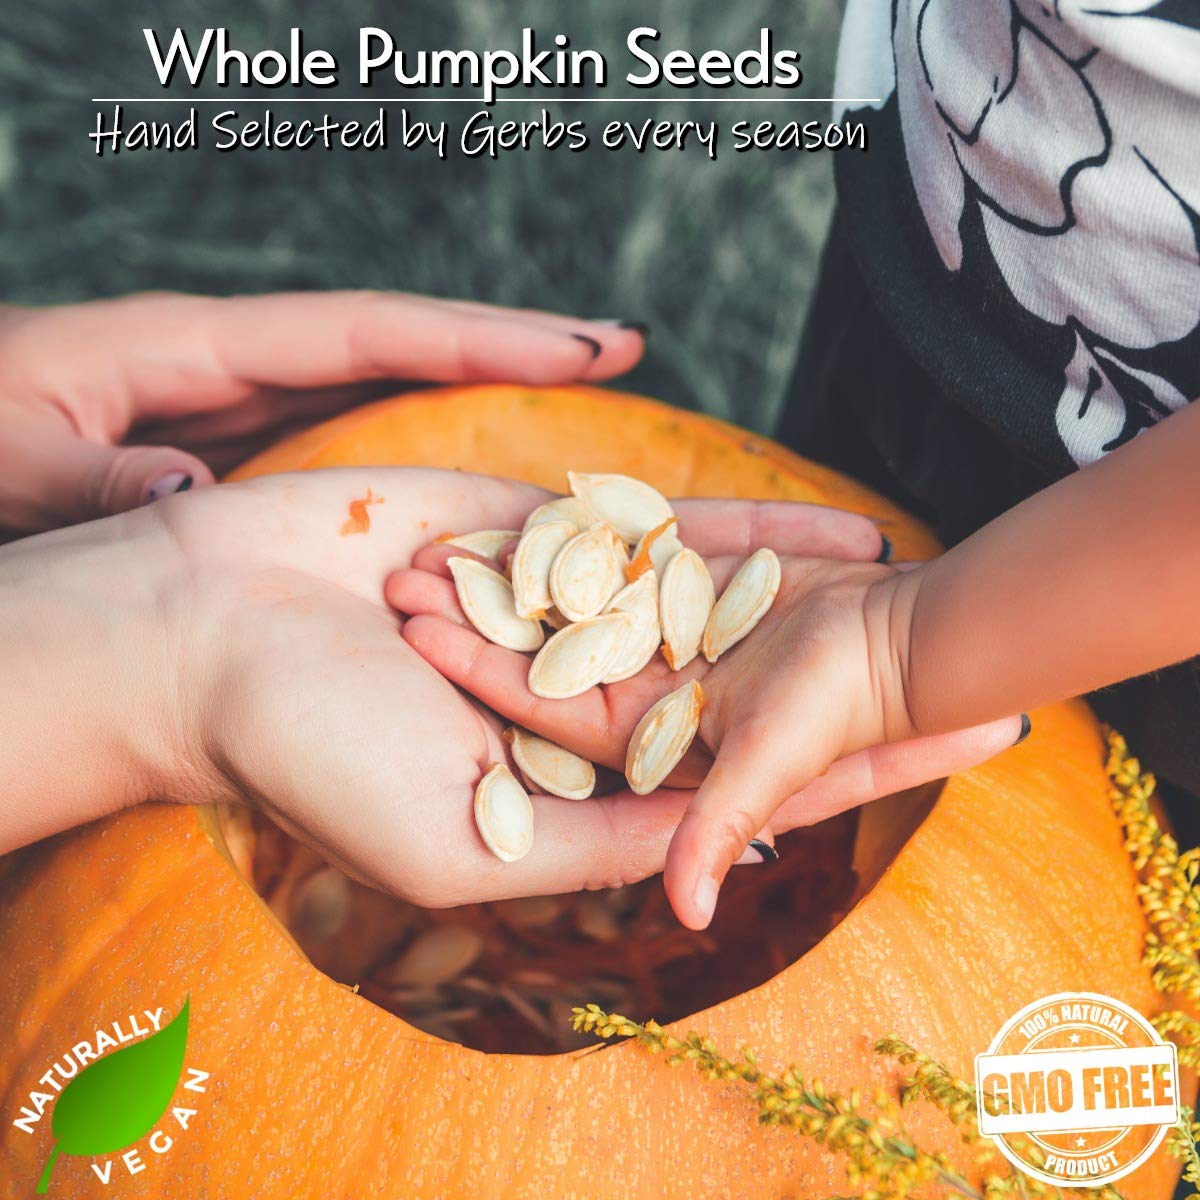 GERBS Lightly Sea Salted Whole Pumpkin Seed 1 LB, Top 14 Allergy Free, Protein packed Superfood Snack, Non GMO, Grown USA & Roasted small in batches : Grocery & Gourmet Food